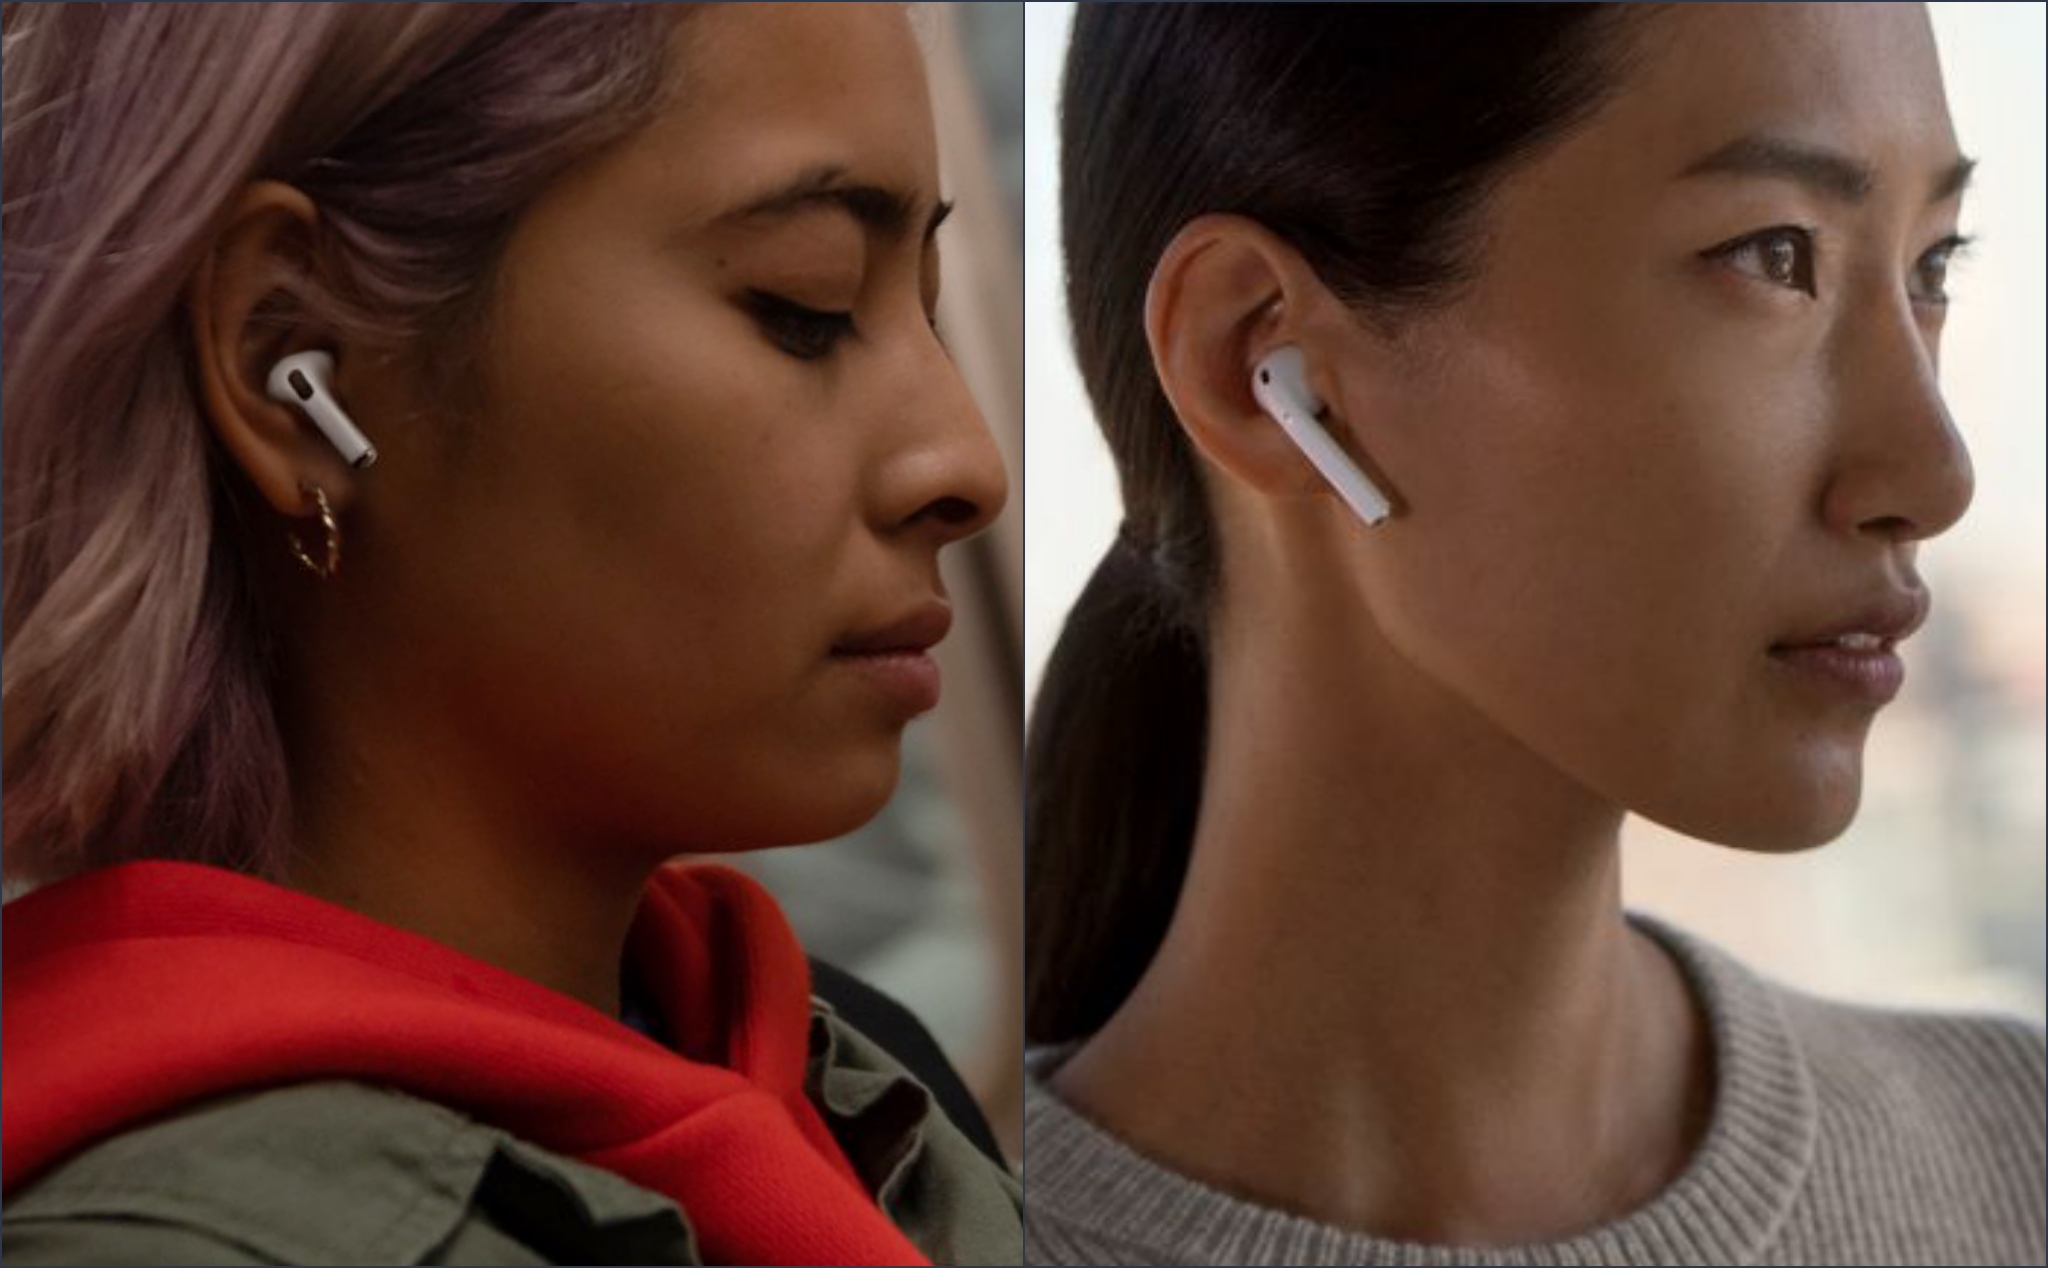 Airpods_Compare.jpg